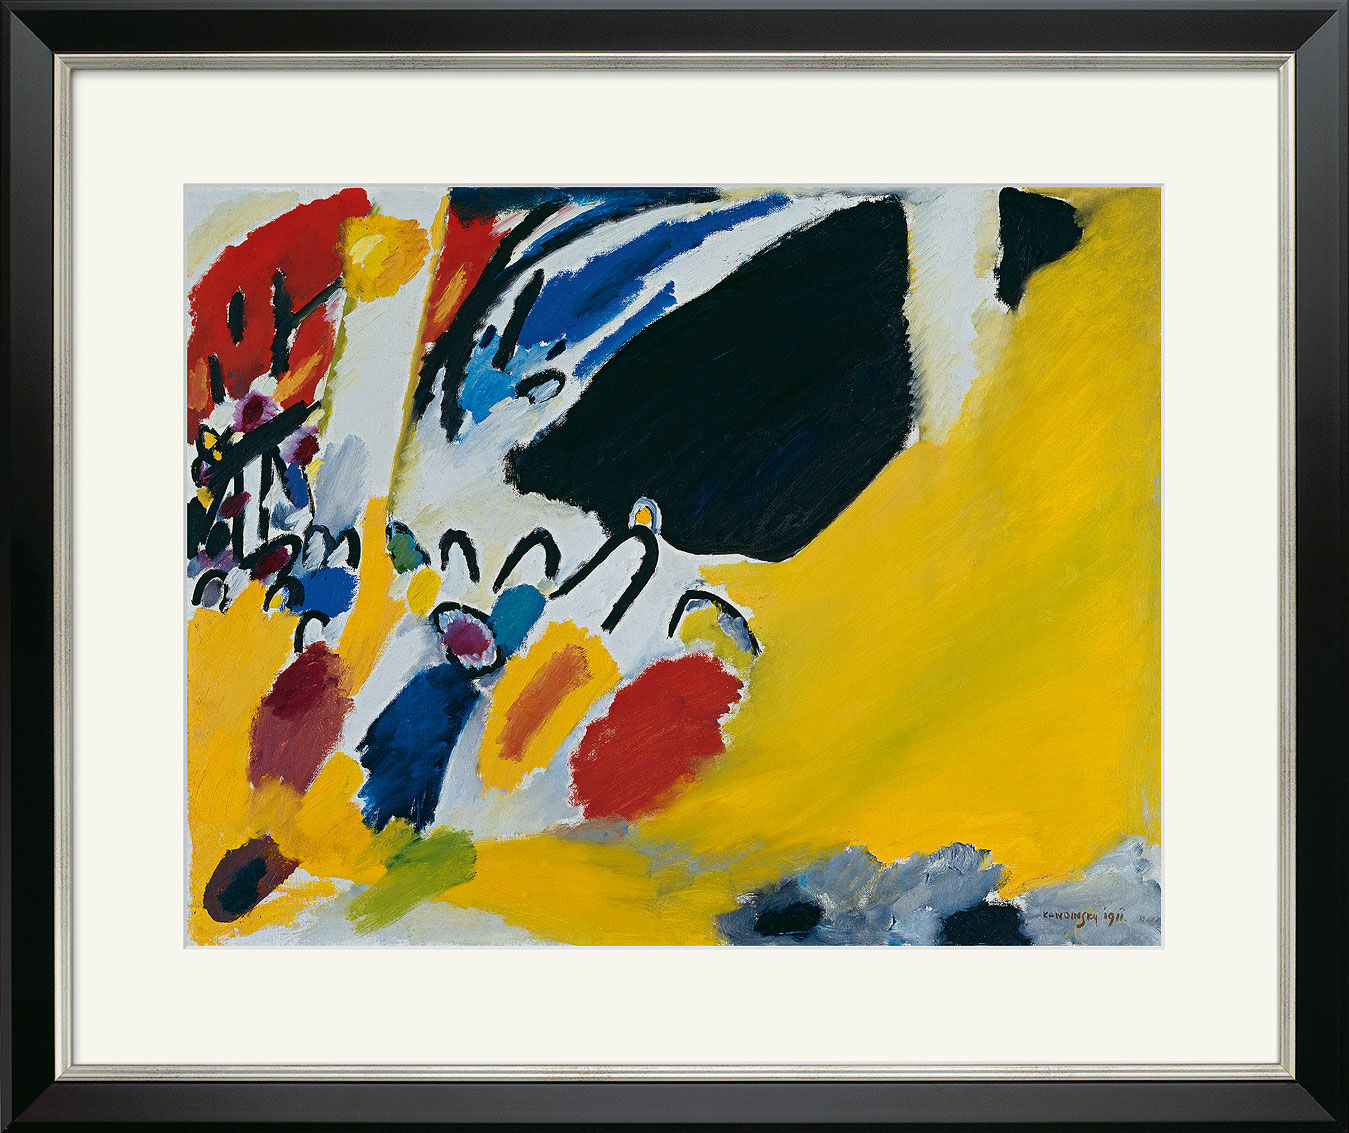 Picture "Impressions III (Concert)" (1911), framed by Wassily Kandinsky